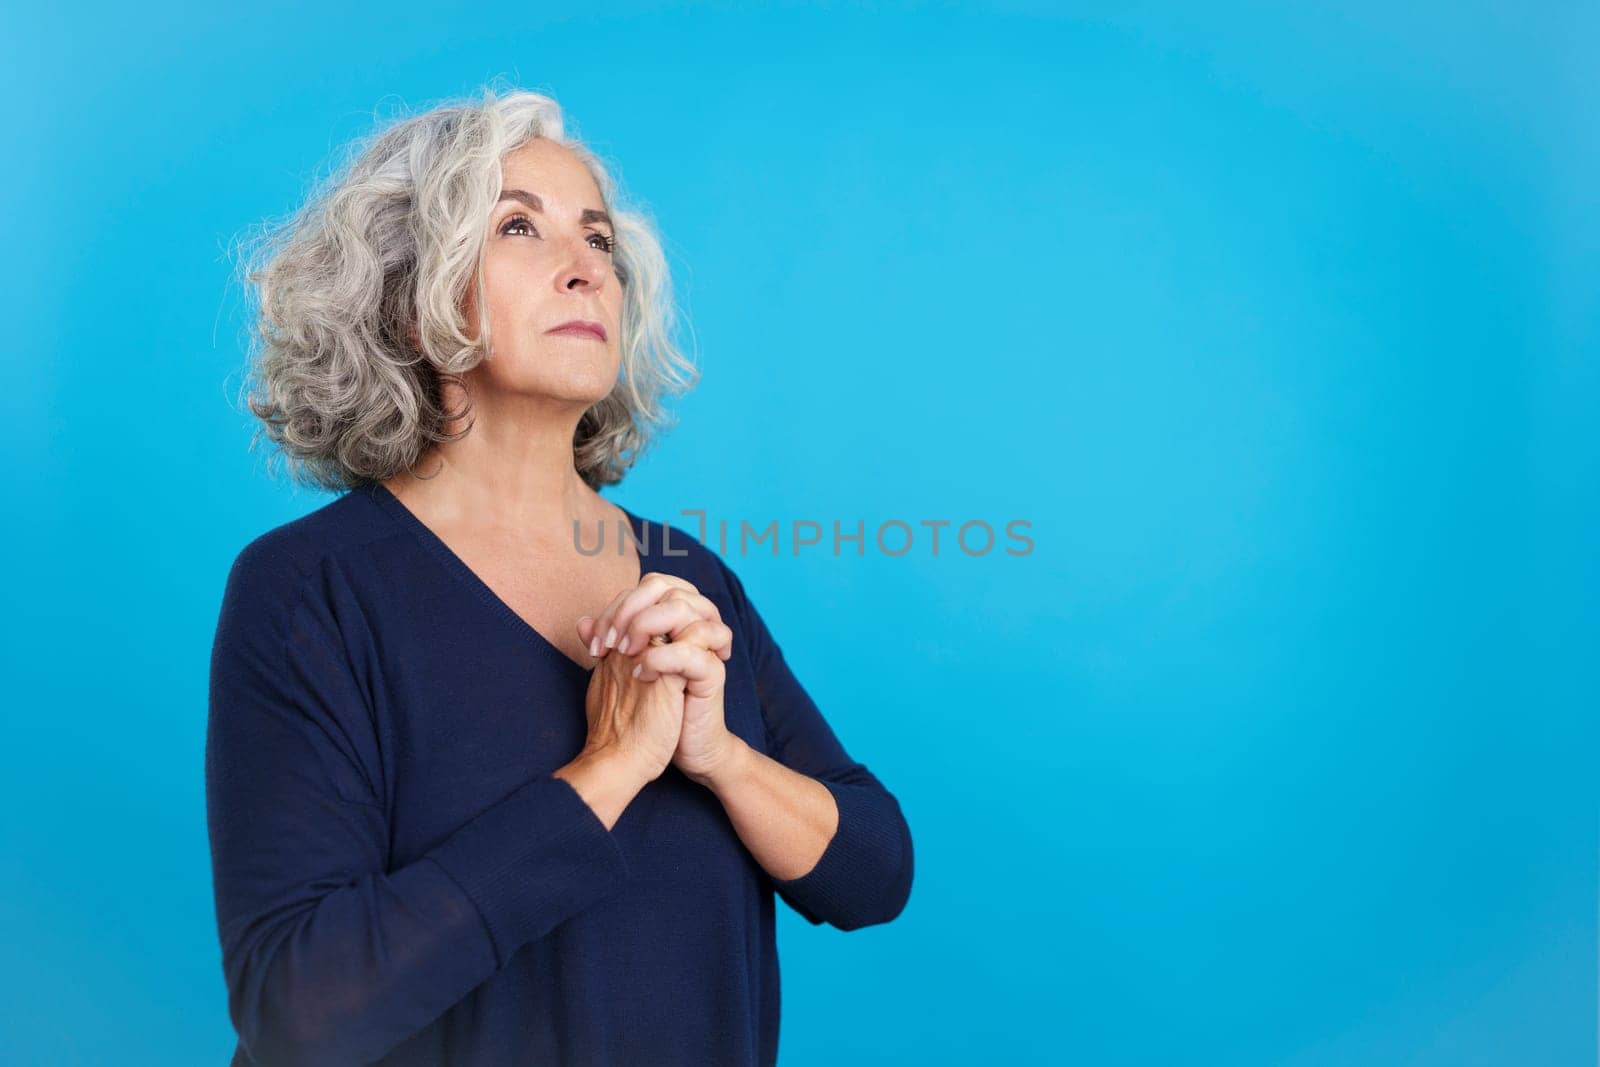 Studio portrait with blue background of a mature woman looking up while praying with folded hands